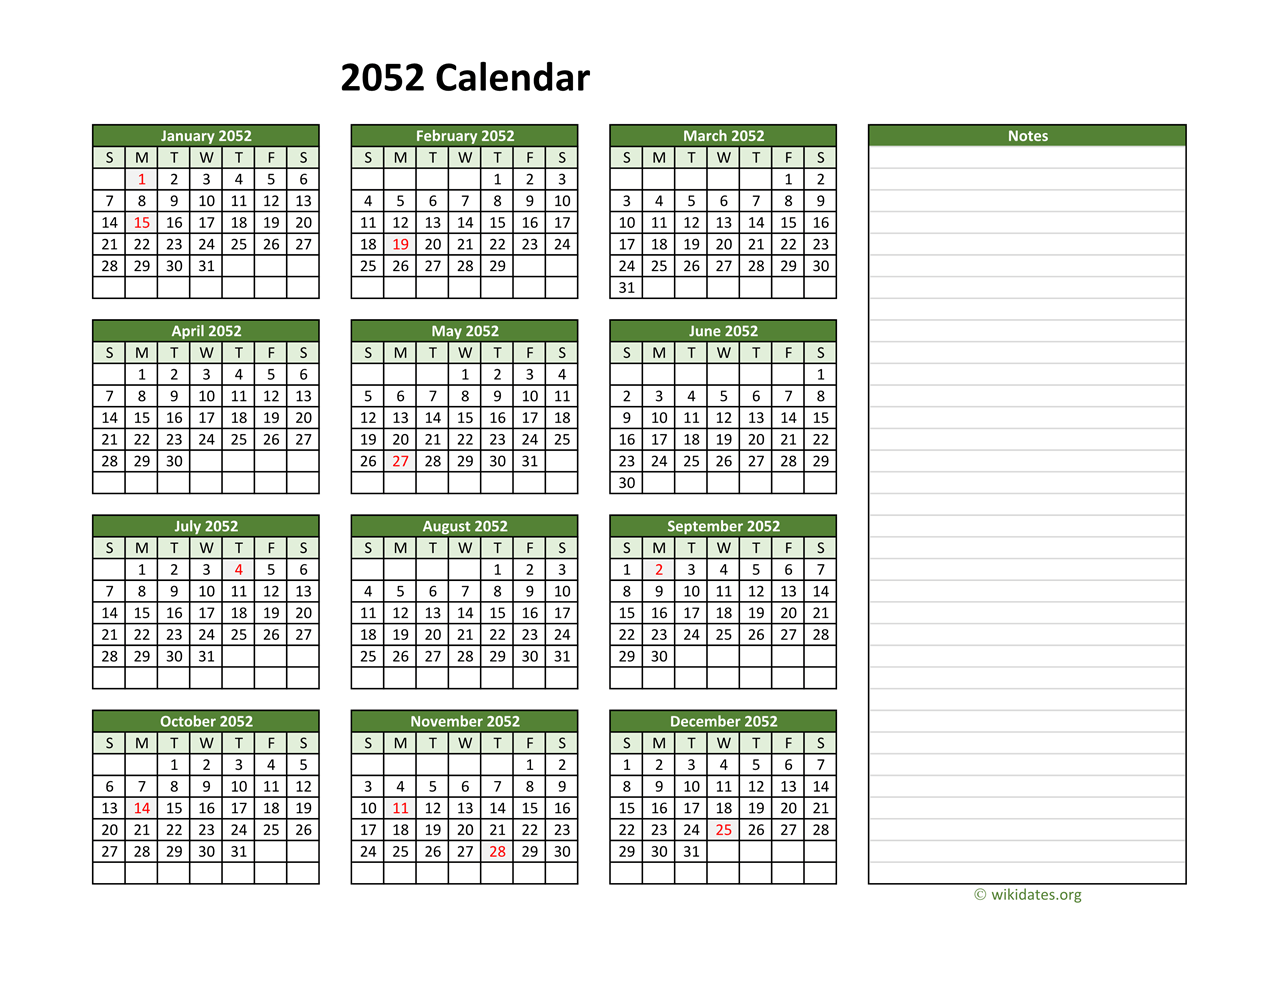 yearly-printable-2052-calendar-with-notes-wikidates